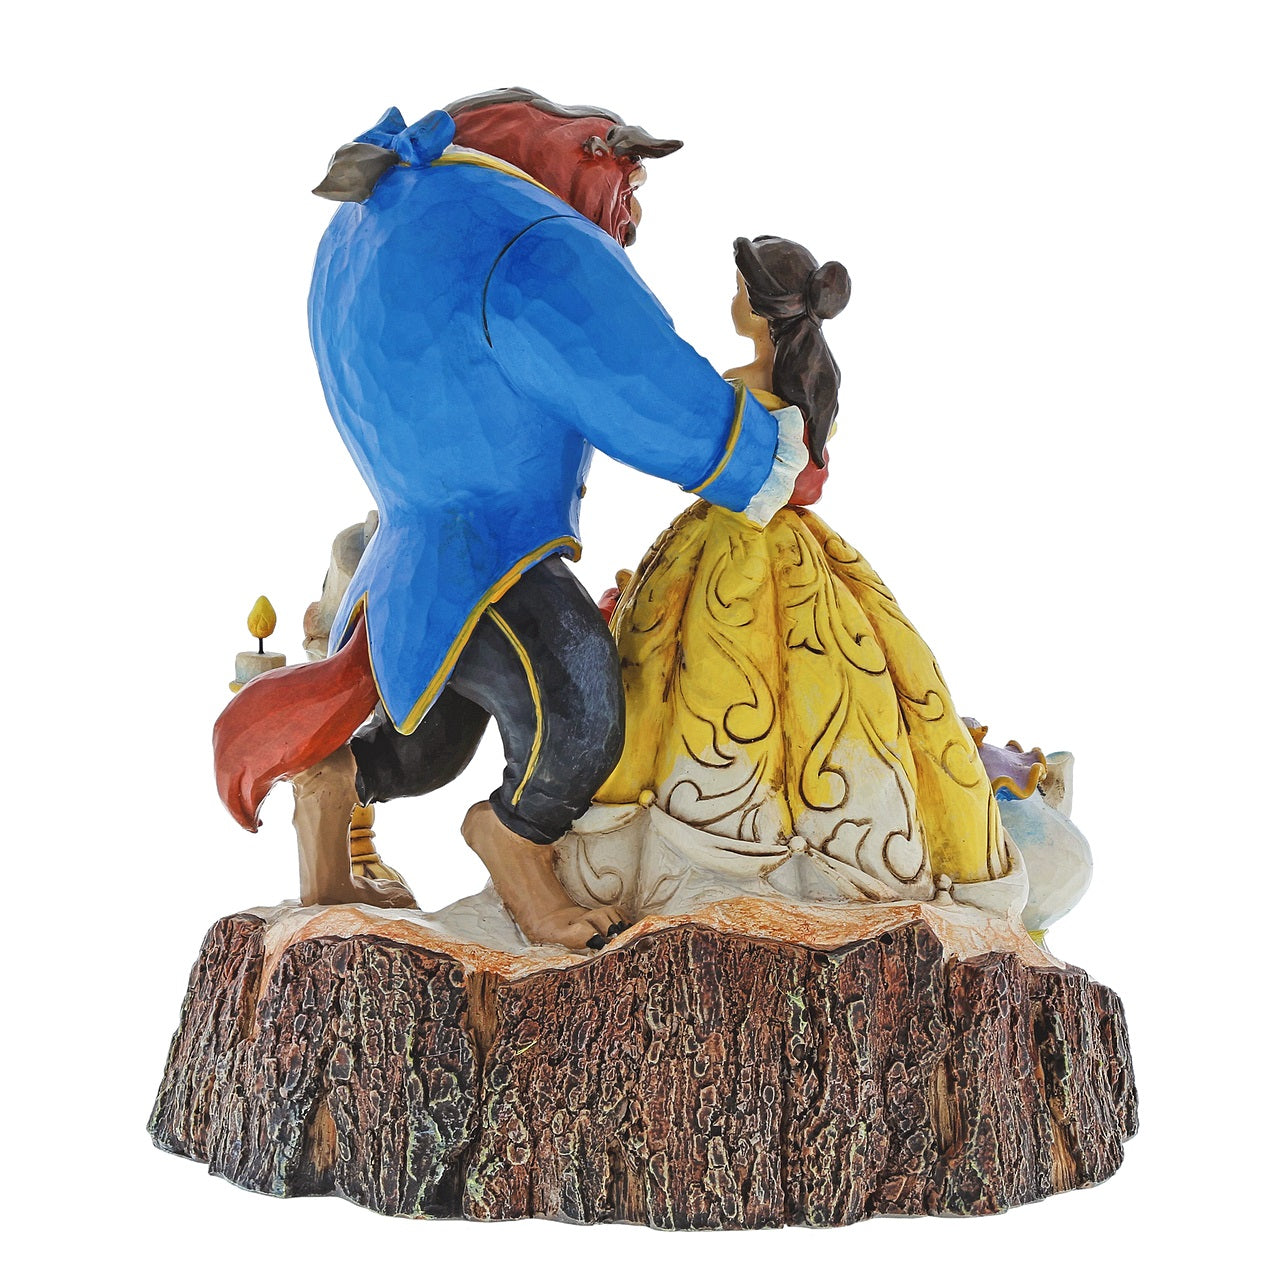 Jim Shore Disney Tale as Old as Time Carved by Heart Beauty and Beast Figurine  Jim Shore continues his Carved by Heart series paying homage to Beauty and the Beast. All 6 of the beloved characters are represented in this log hewn sculpture. Designed by award-winning artist and sculptor, Jim Shore for the Disney Tradition brand.